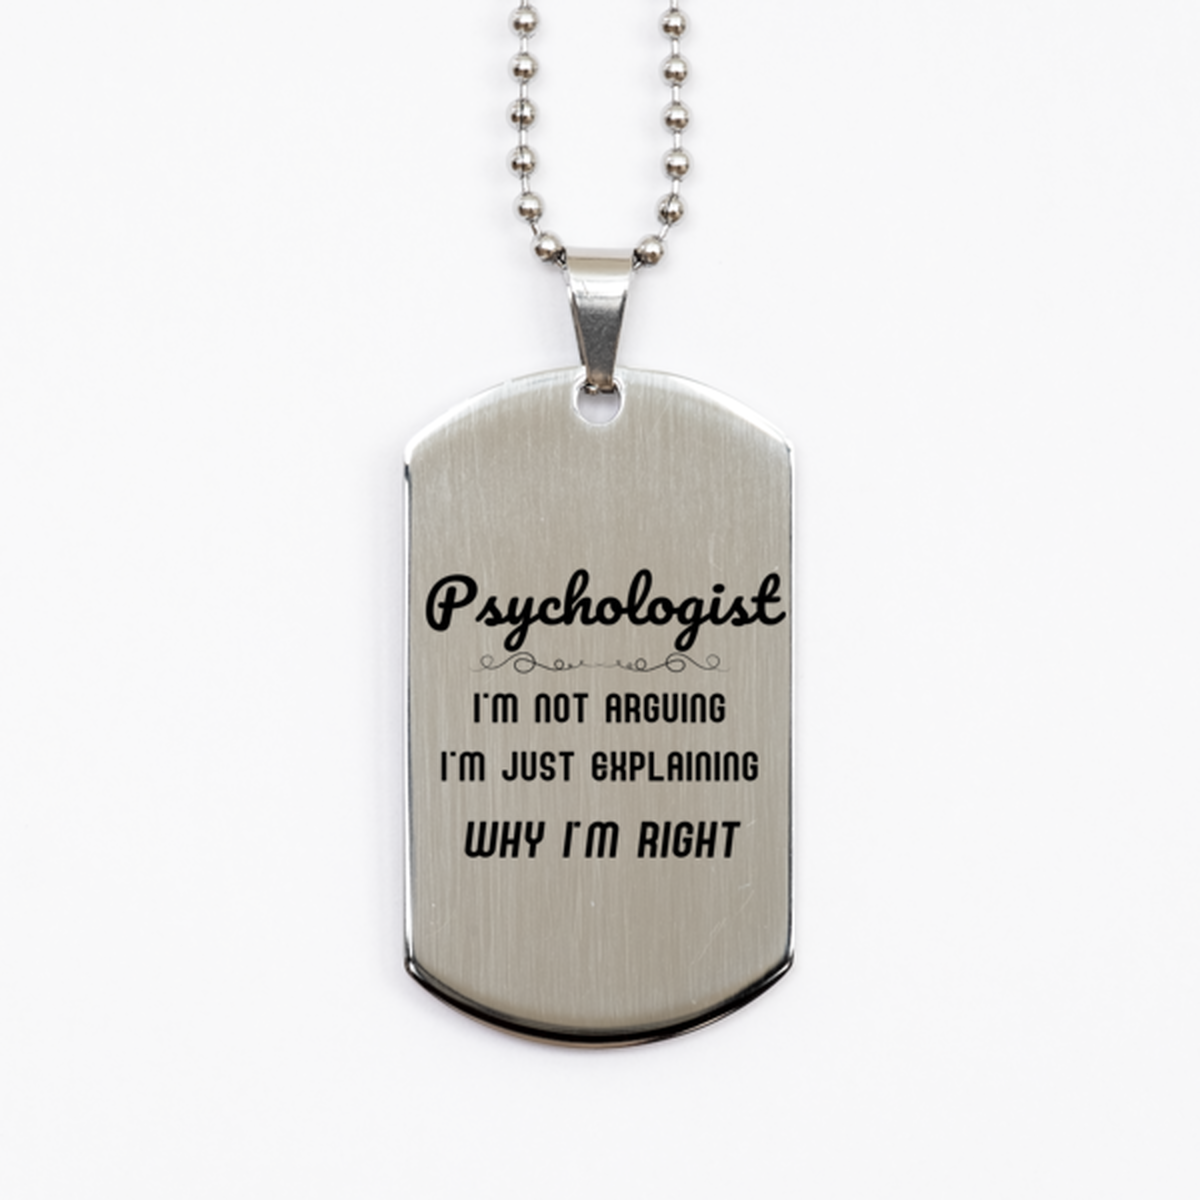 Psychologist I'm not Arguing. I'm Just Explaining Why I'm RIGHT Silver Dog Tag, Funny Saying Quote Psychologist Gifts For Psychologist Graduation Birthday Christmas Gifts for Men Women Coworker